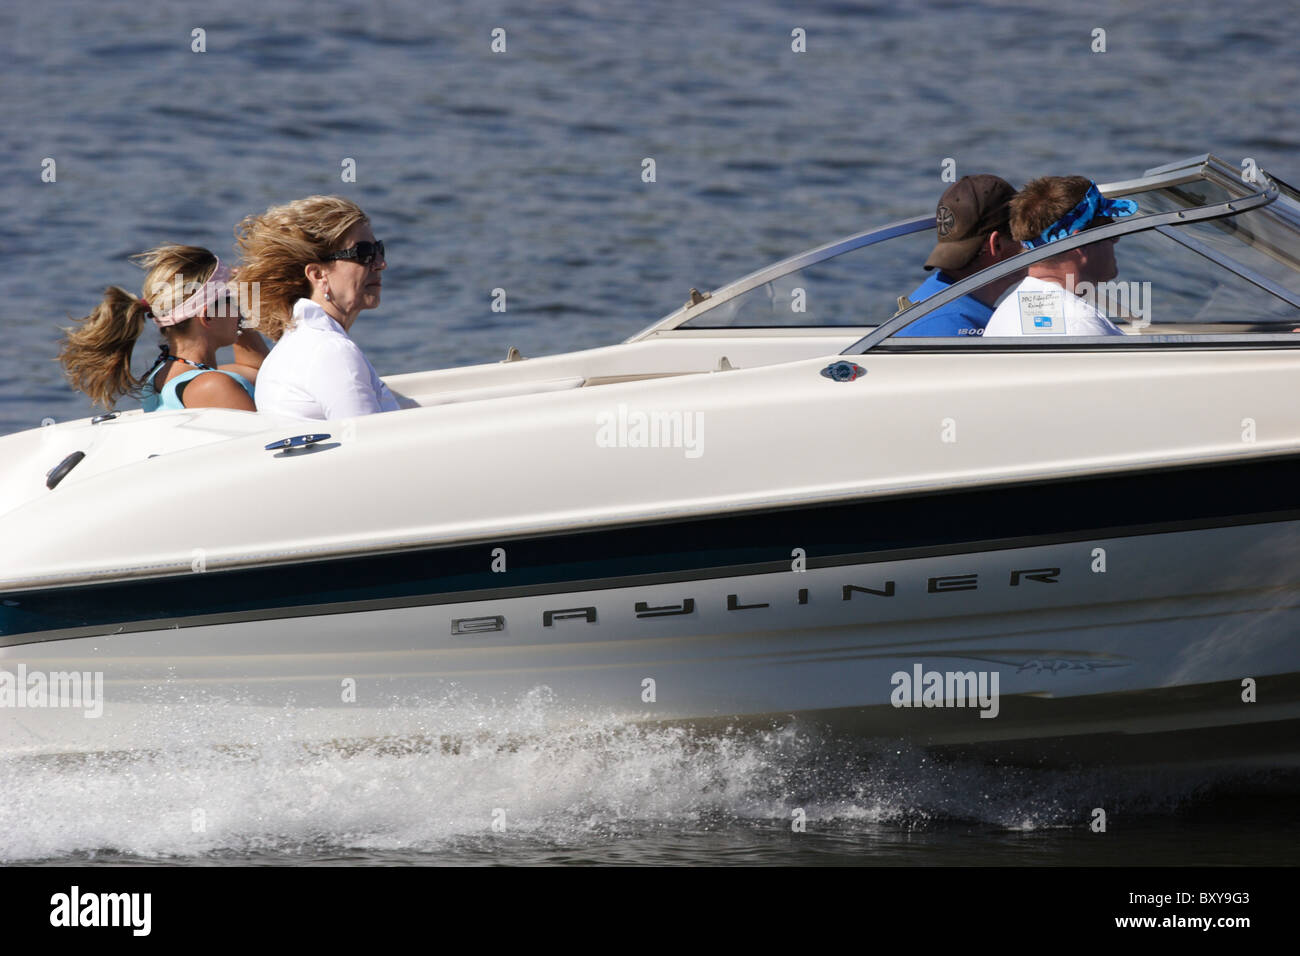 People boating on James River, Richmond, Virginia 2010 Stock Photo